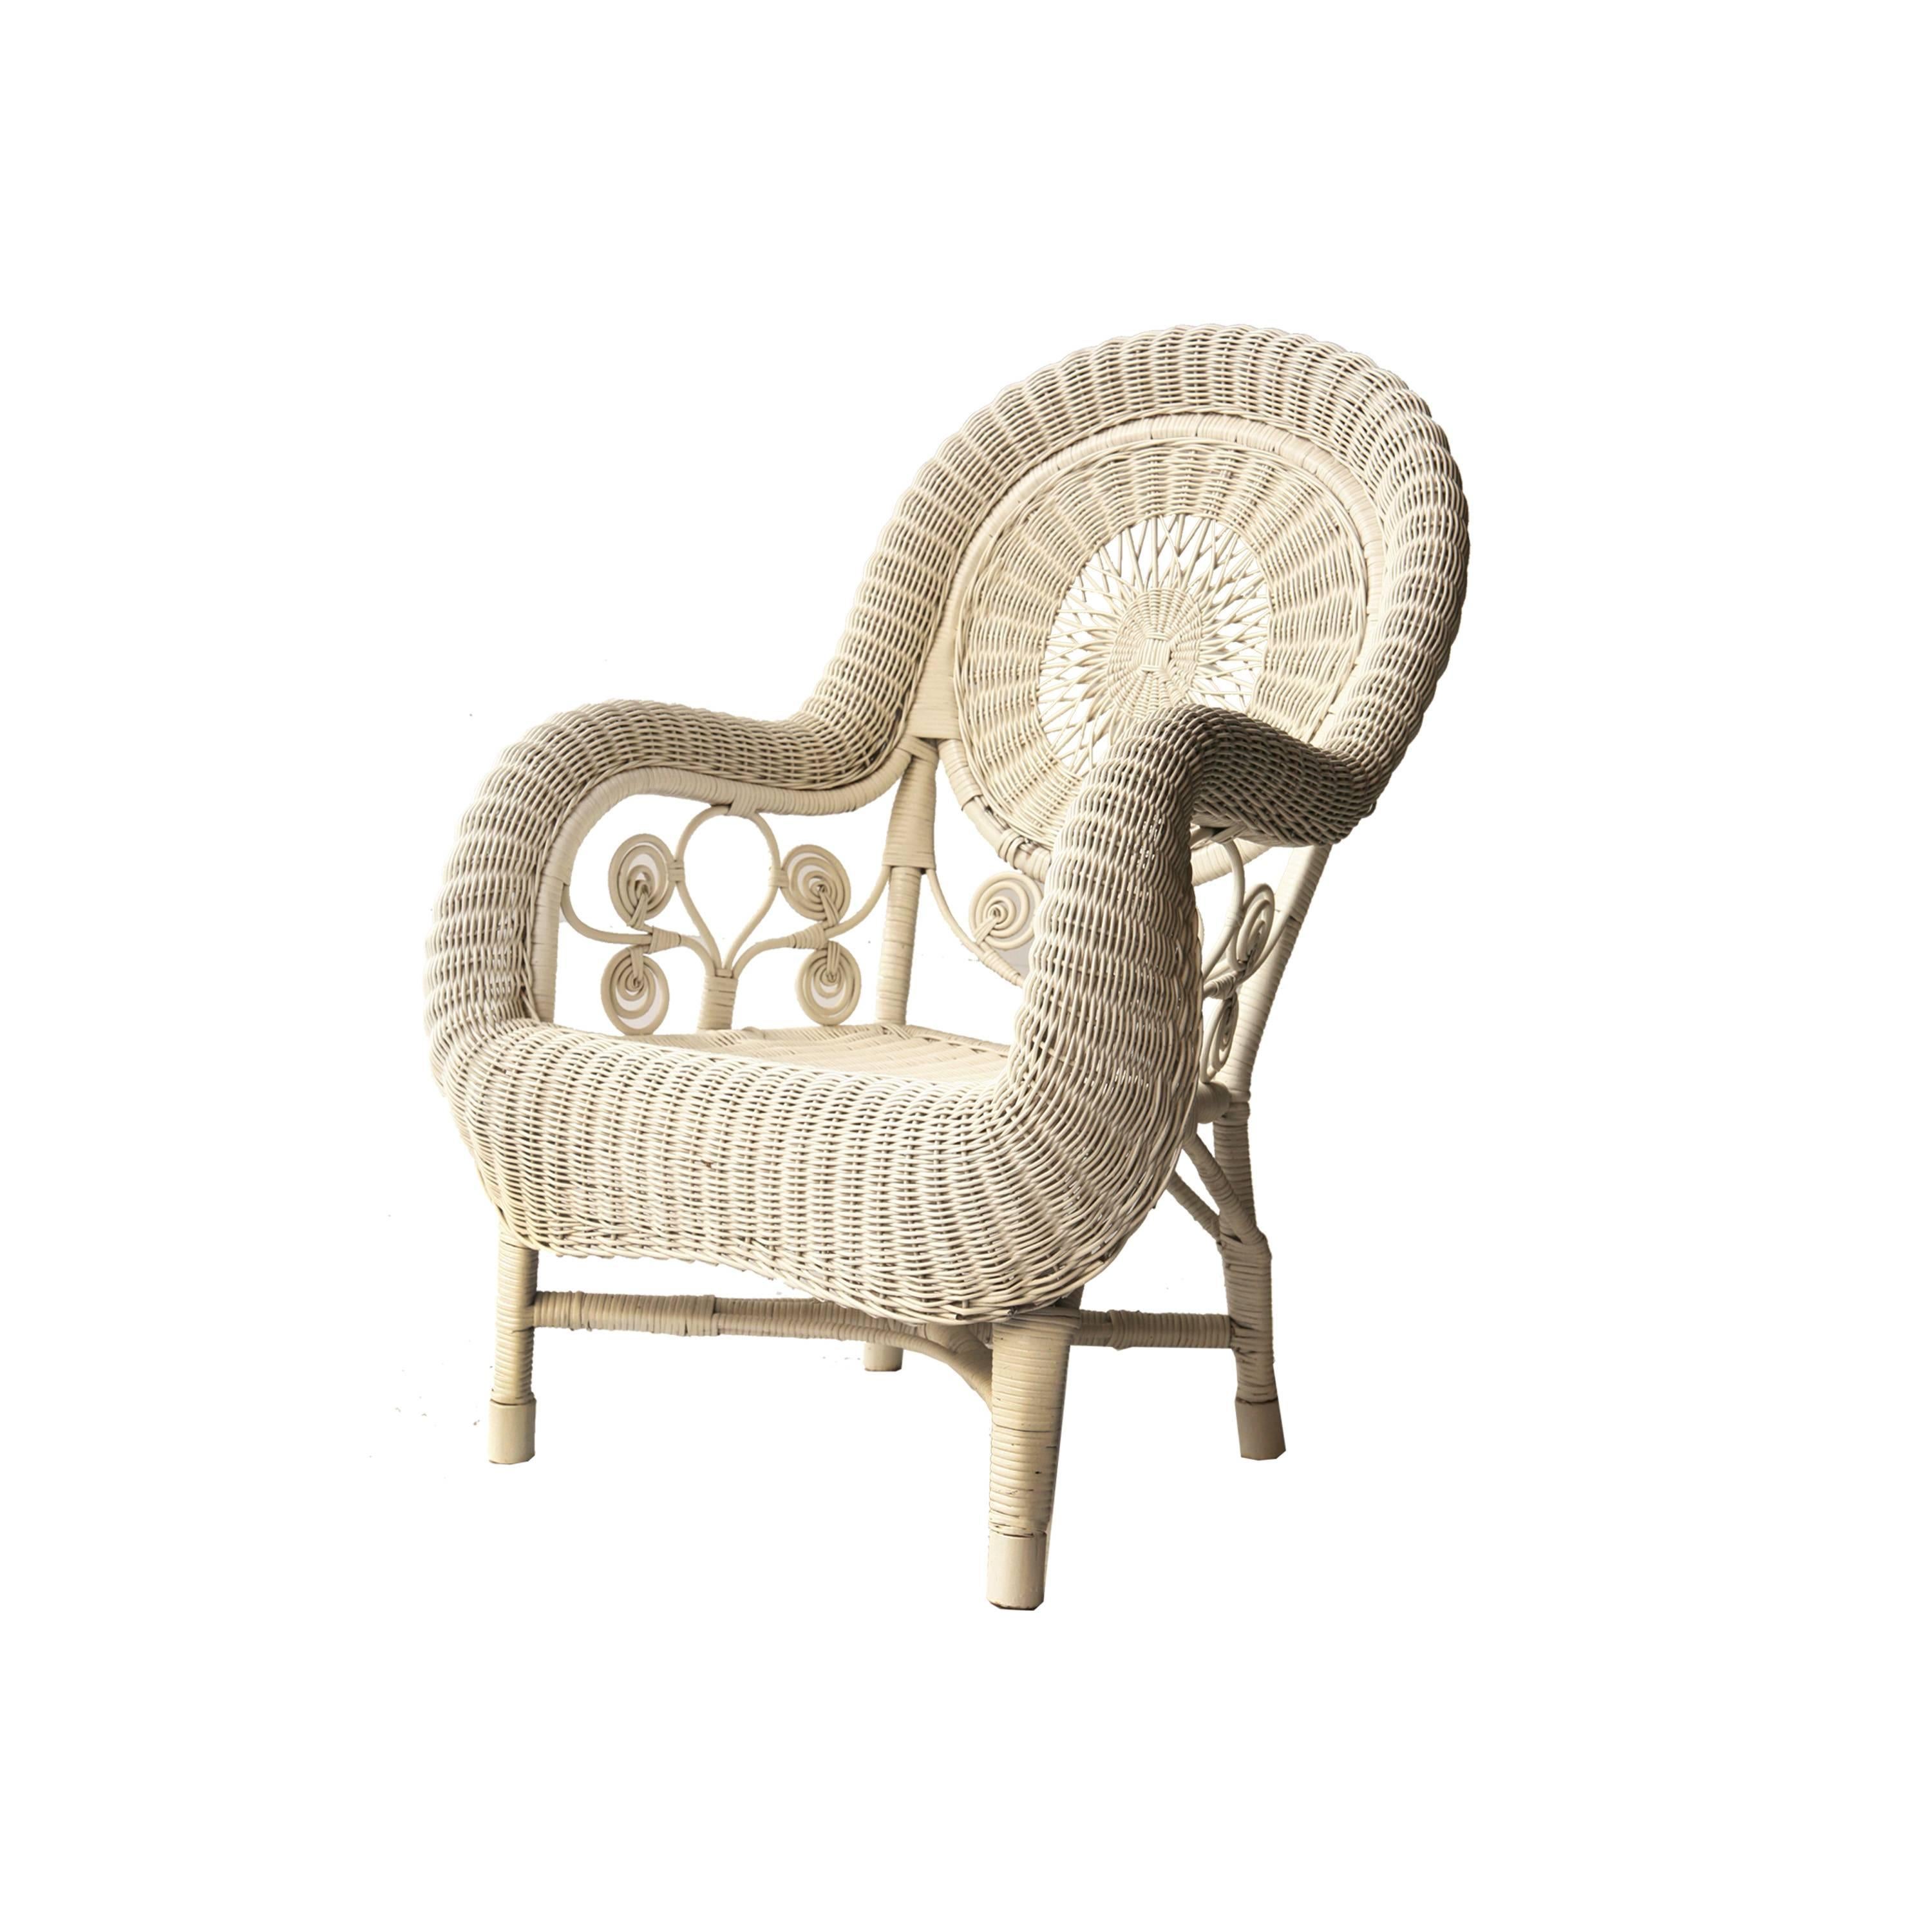 Pair of armchairs craftmade in natural fiber estructure painted in white.